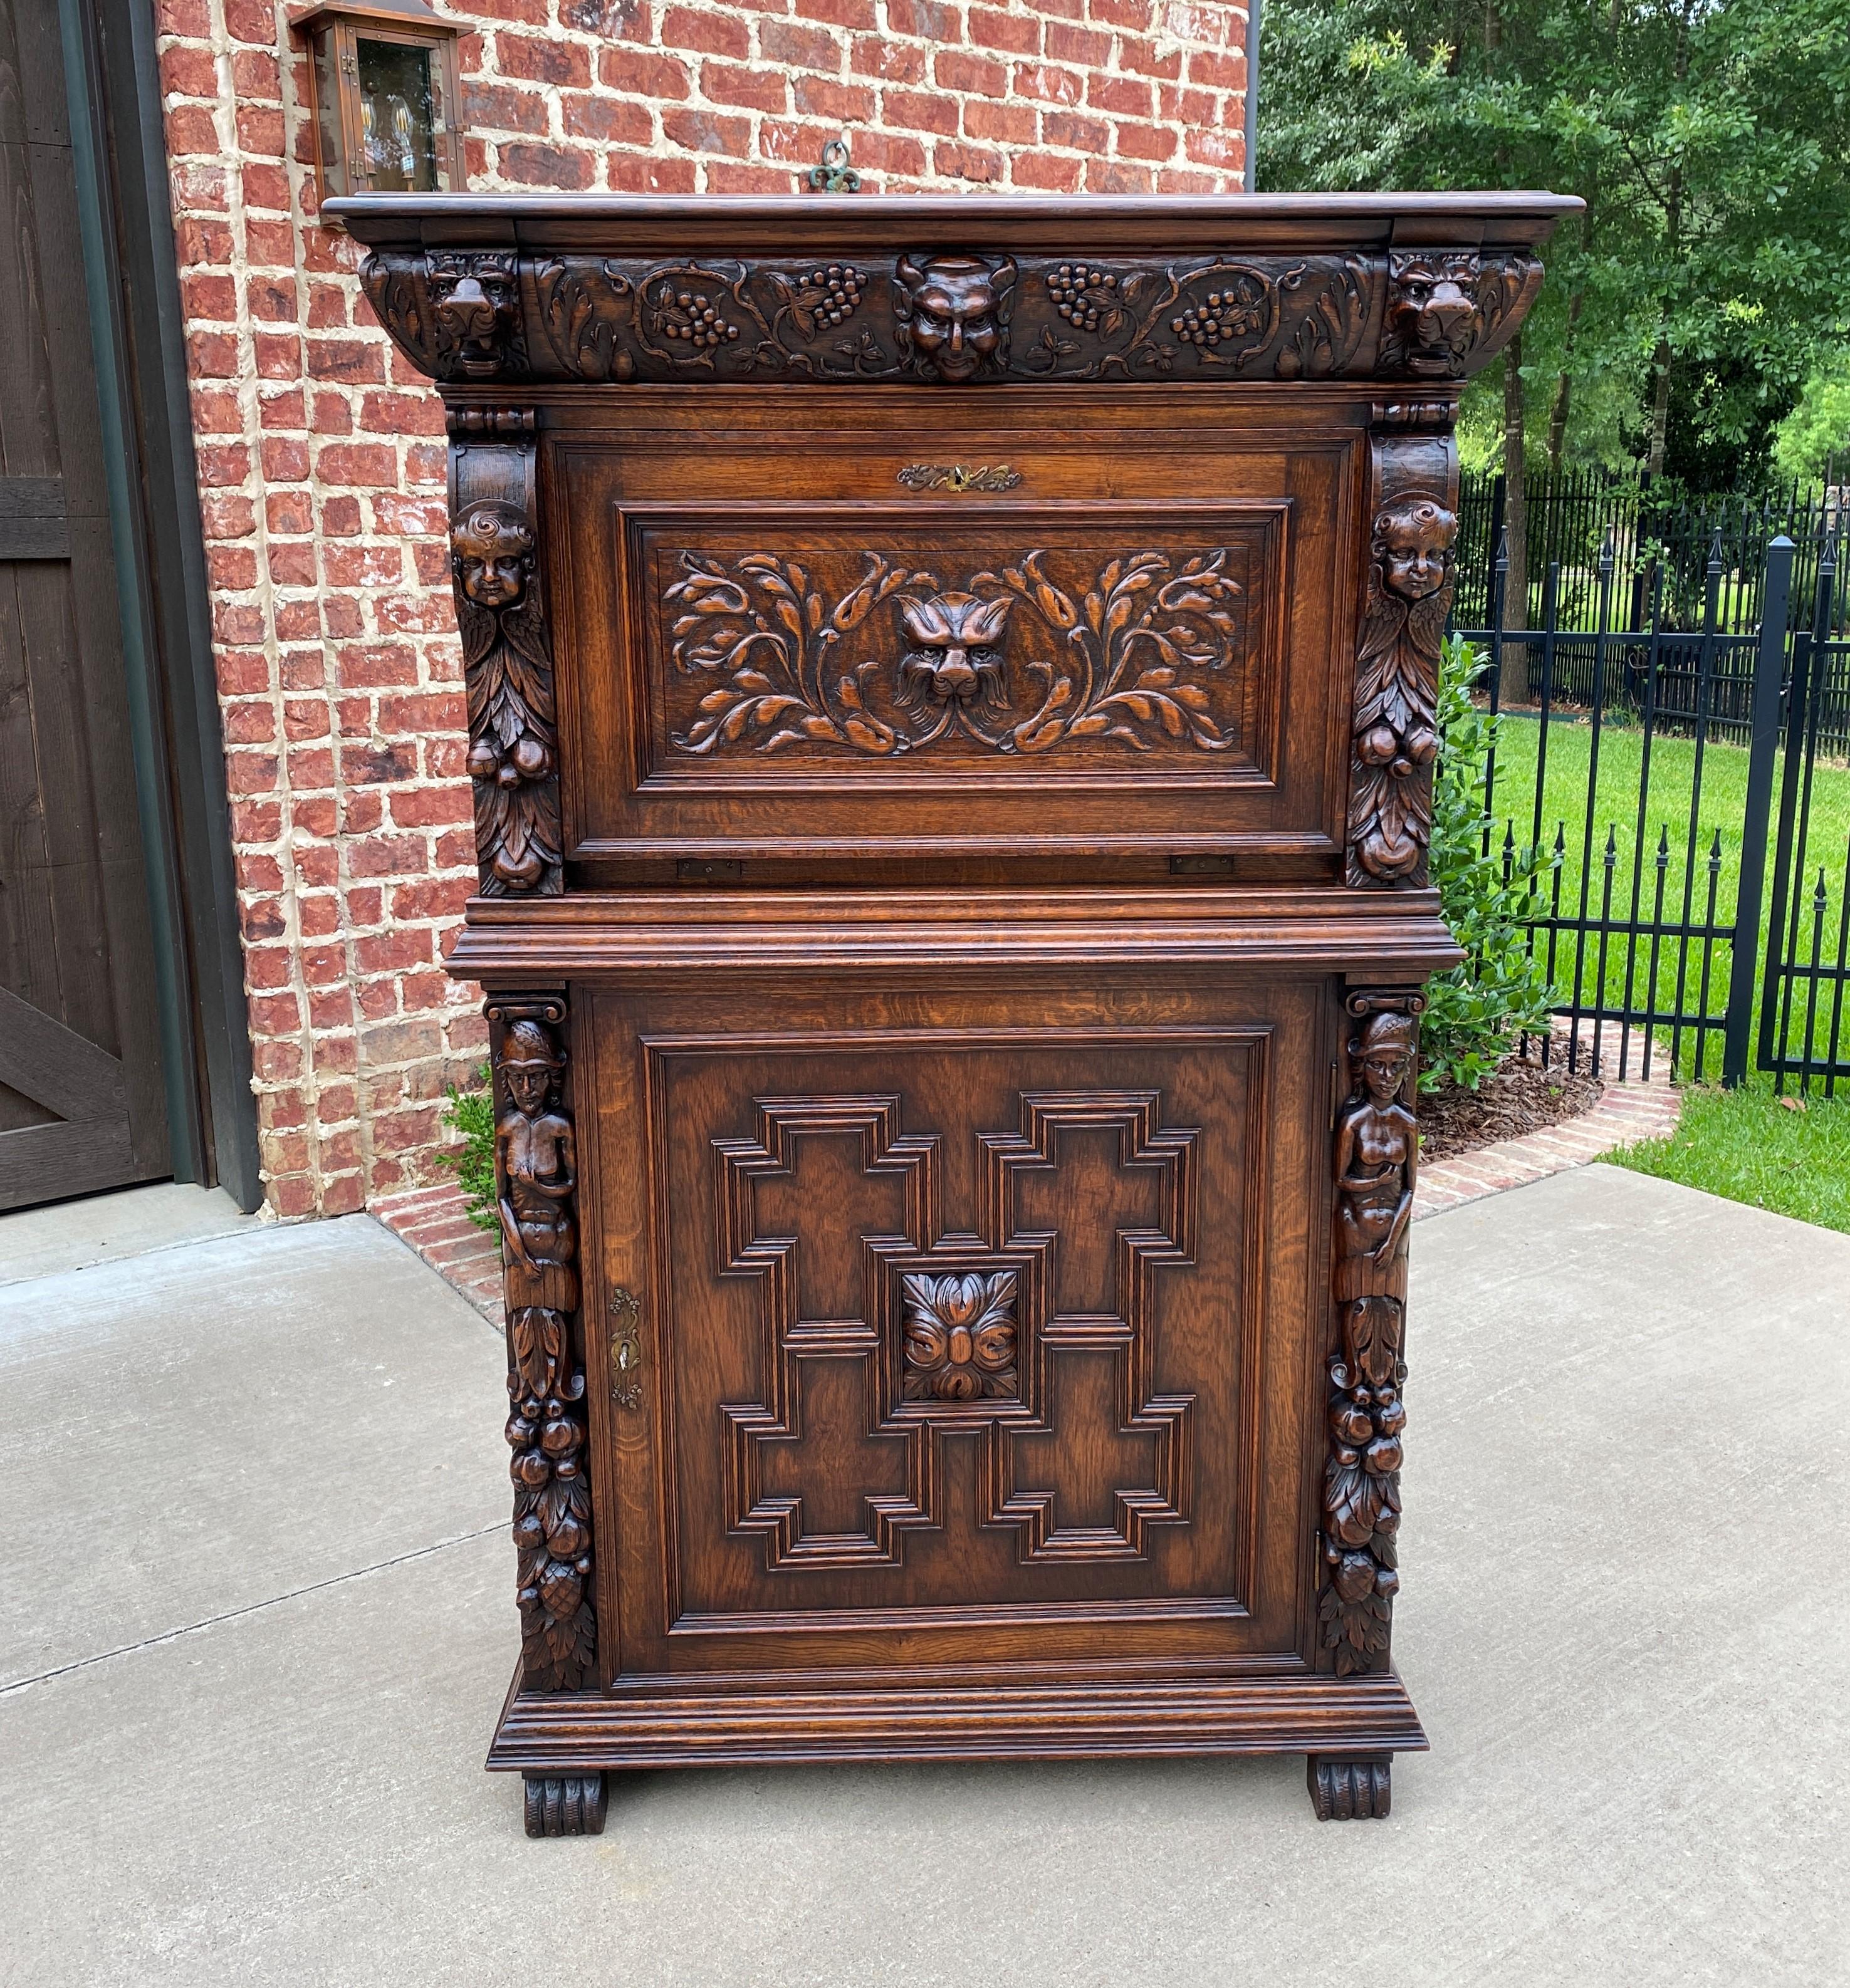 Stunning antique French oak 19th century Gothic bar, liquor cabinet or cupboard~~fall front serving area ~~c. 1880s

So many versatile uses for today's home
Entry or foyer 